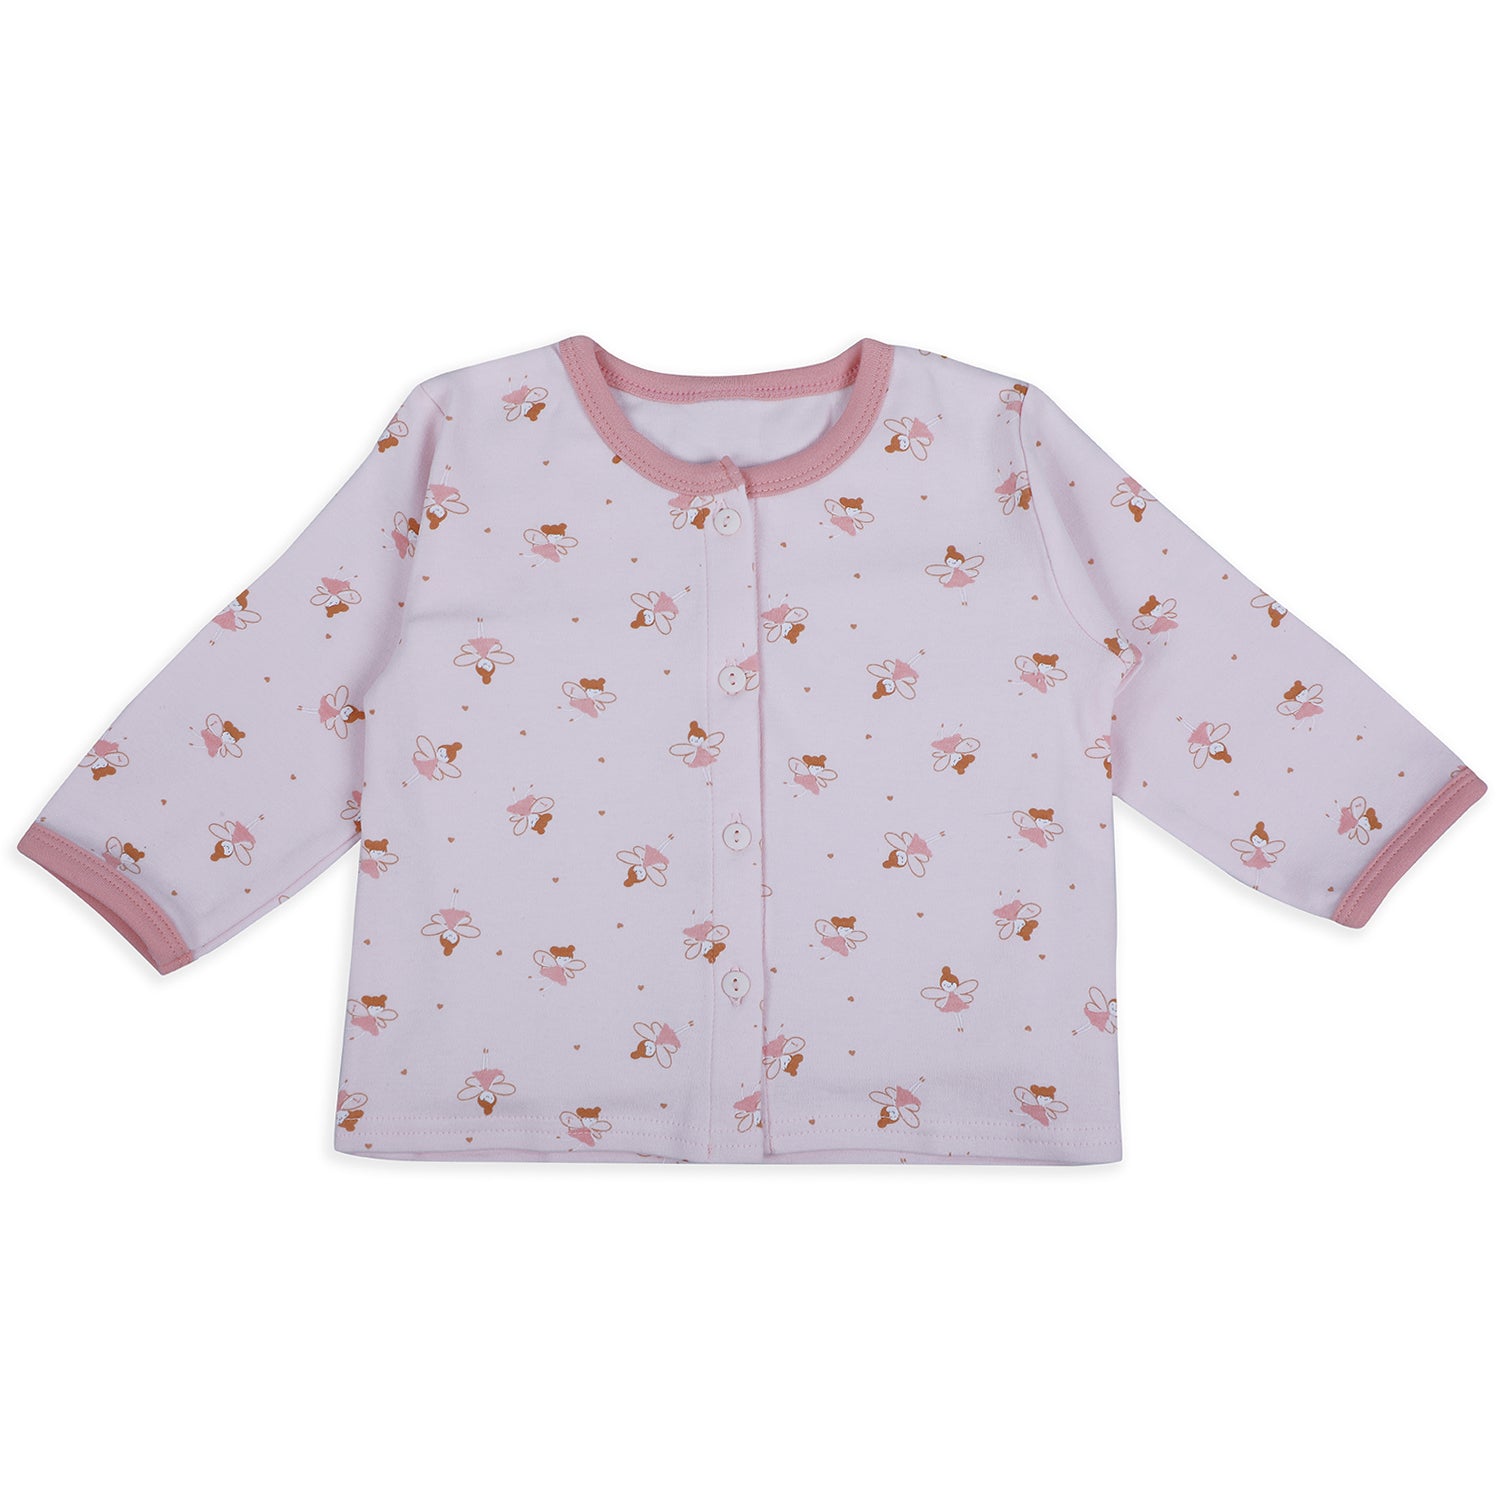 Baby Moo Fairy Print Soft Cotton Full Sleeves Top And Pyjama 2pcs Night Suit - Pink - Baby Moo